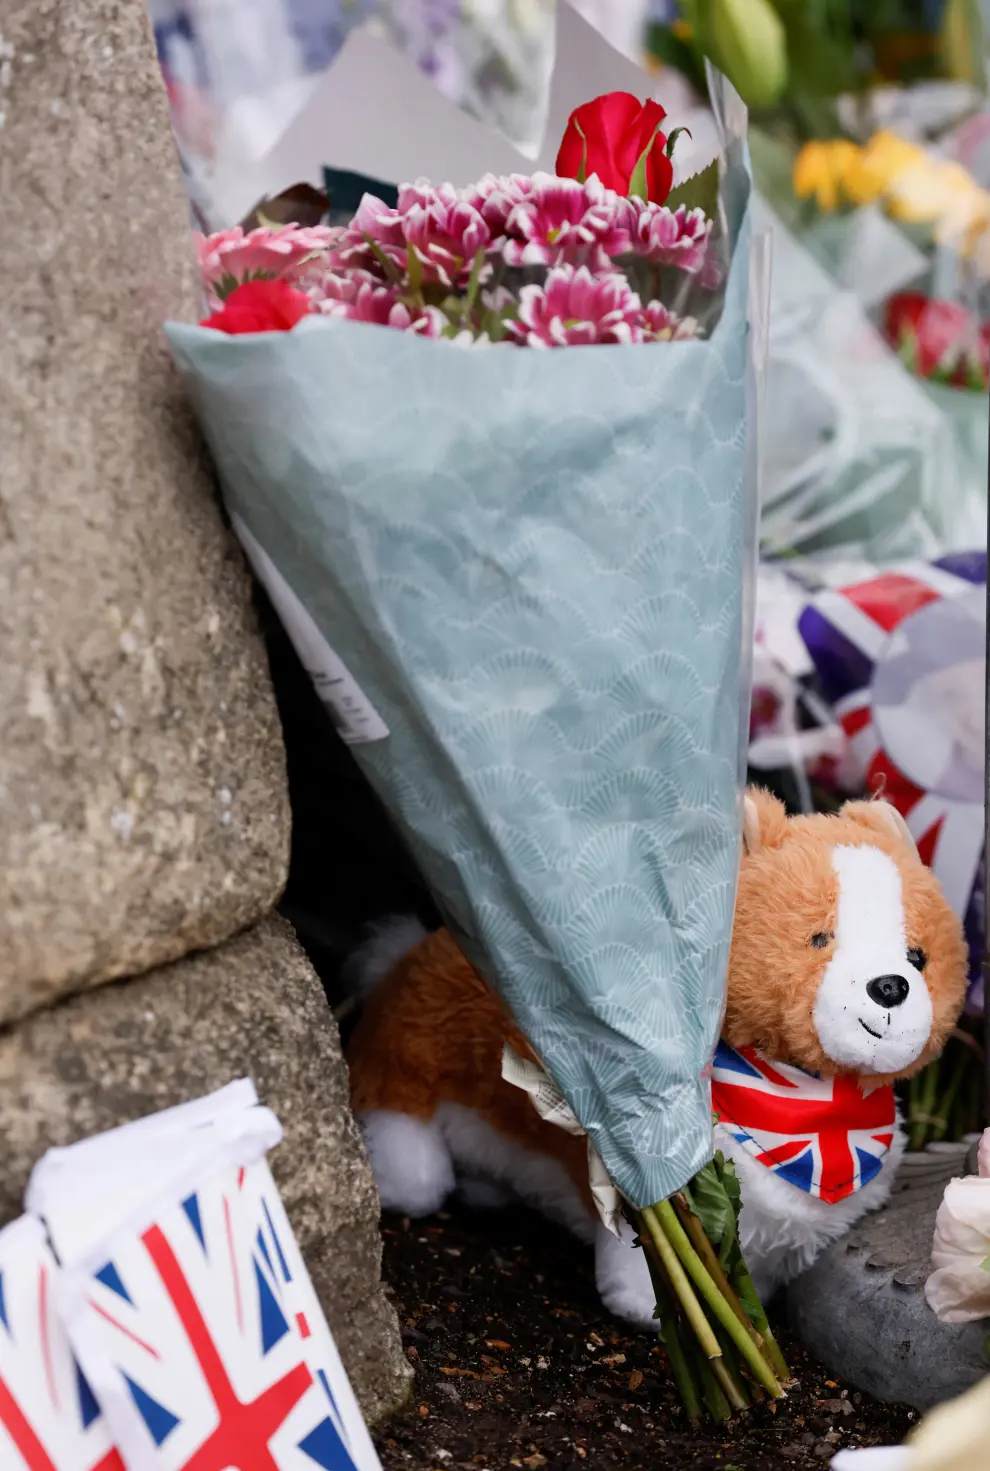 Flowers and a plush toy lie at Windsor Castle, following the passing of Britain's Queen Elizabeth, in Windsor, Britain, September 9, 2022. REUTERS/Andrew Couldridge

 BRITAIN-ROYALS/QUEEN